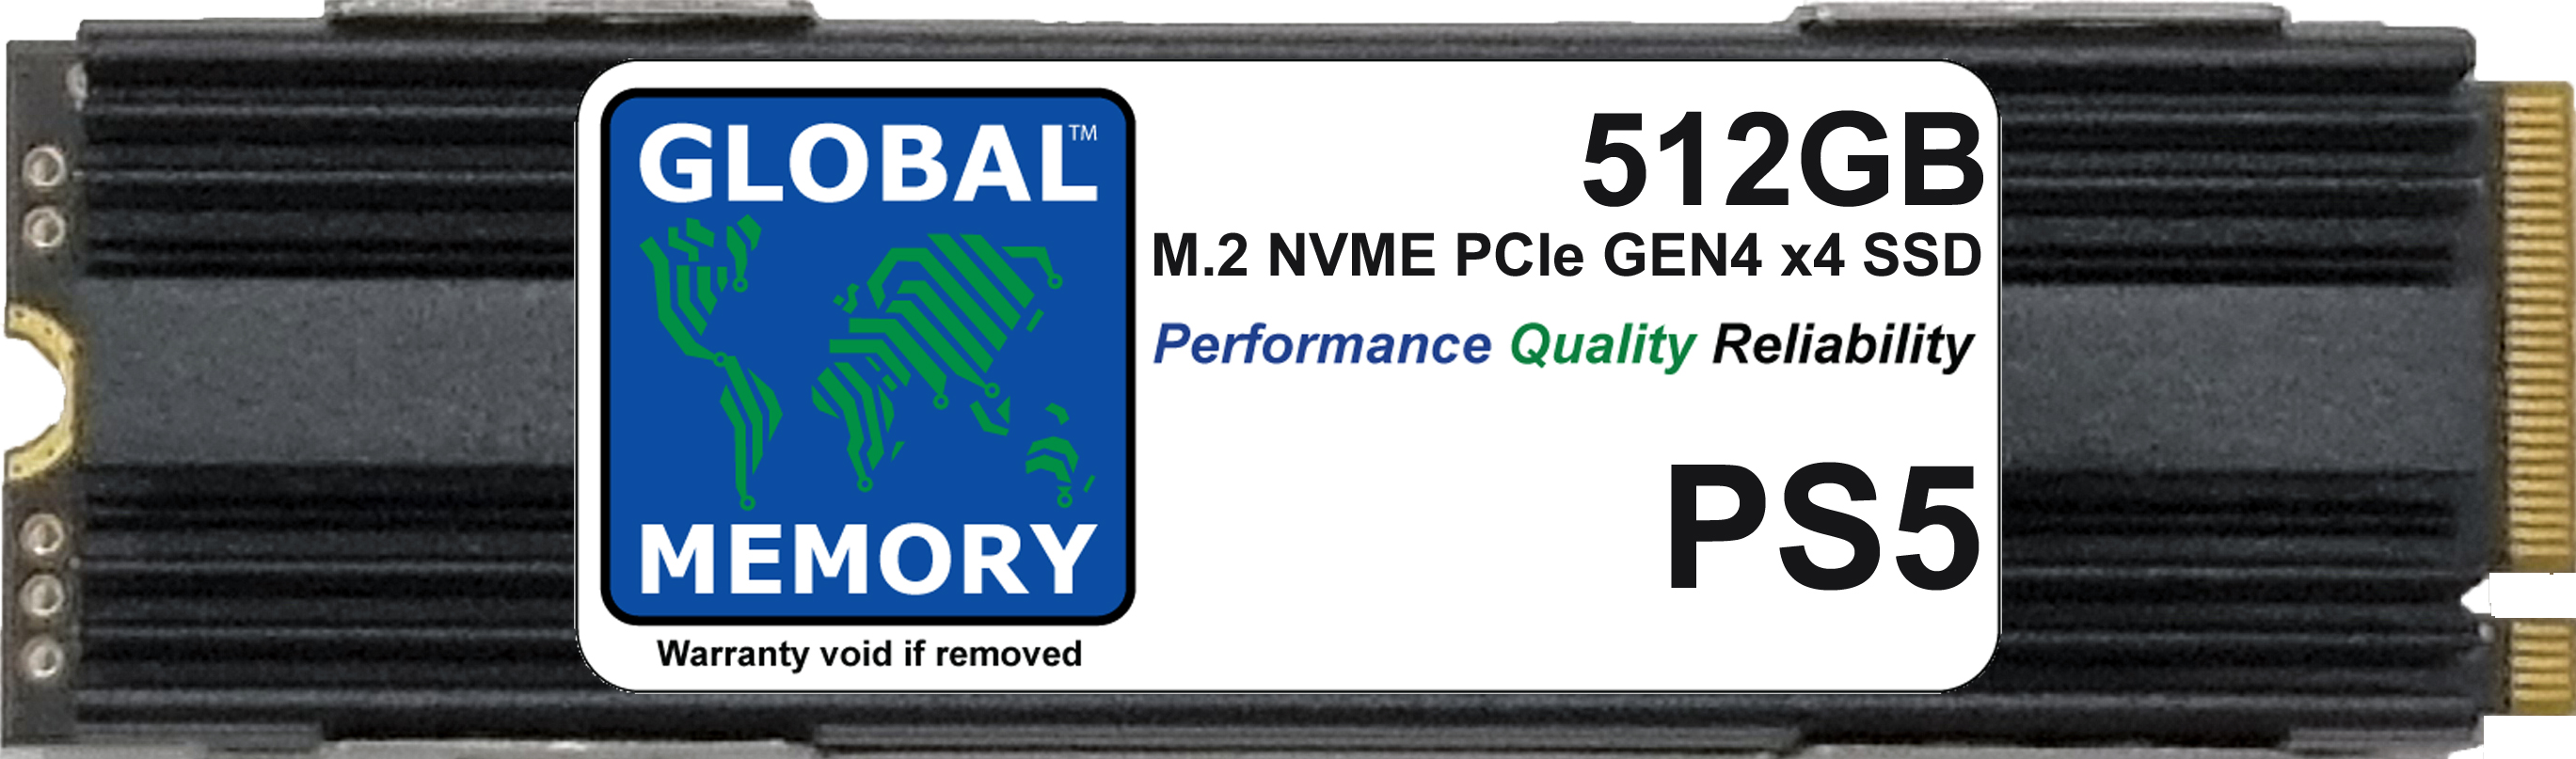 512GB M.2 2280 PCIe Gen4 x4 NVMe SSD WITH DRAM + HEATSINK FOR PLAYSTATION 5 (PS5)